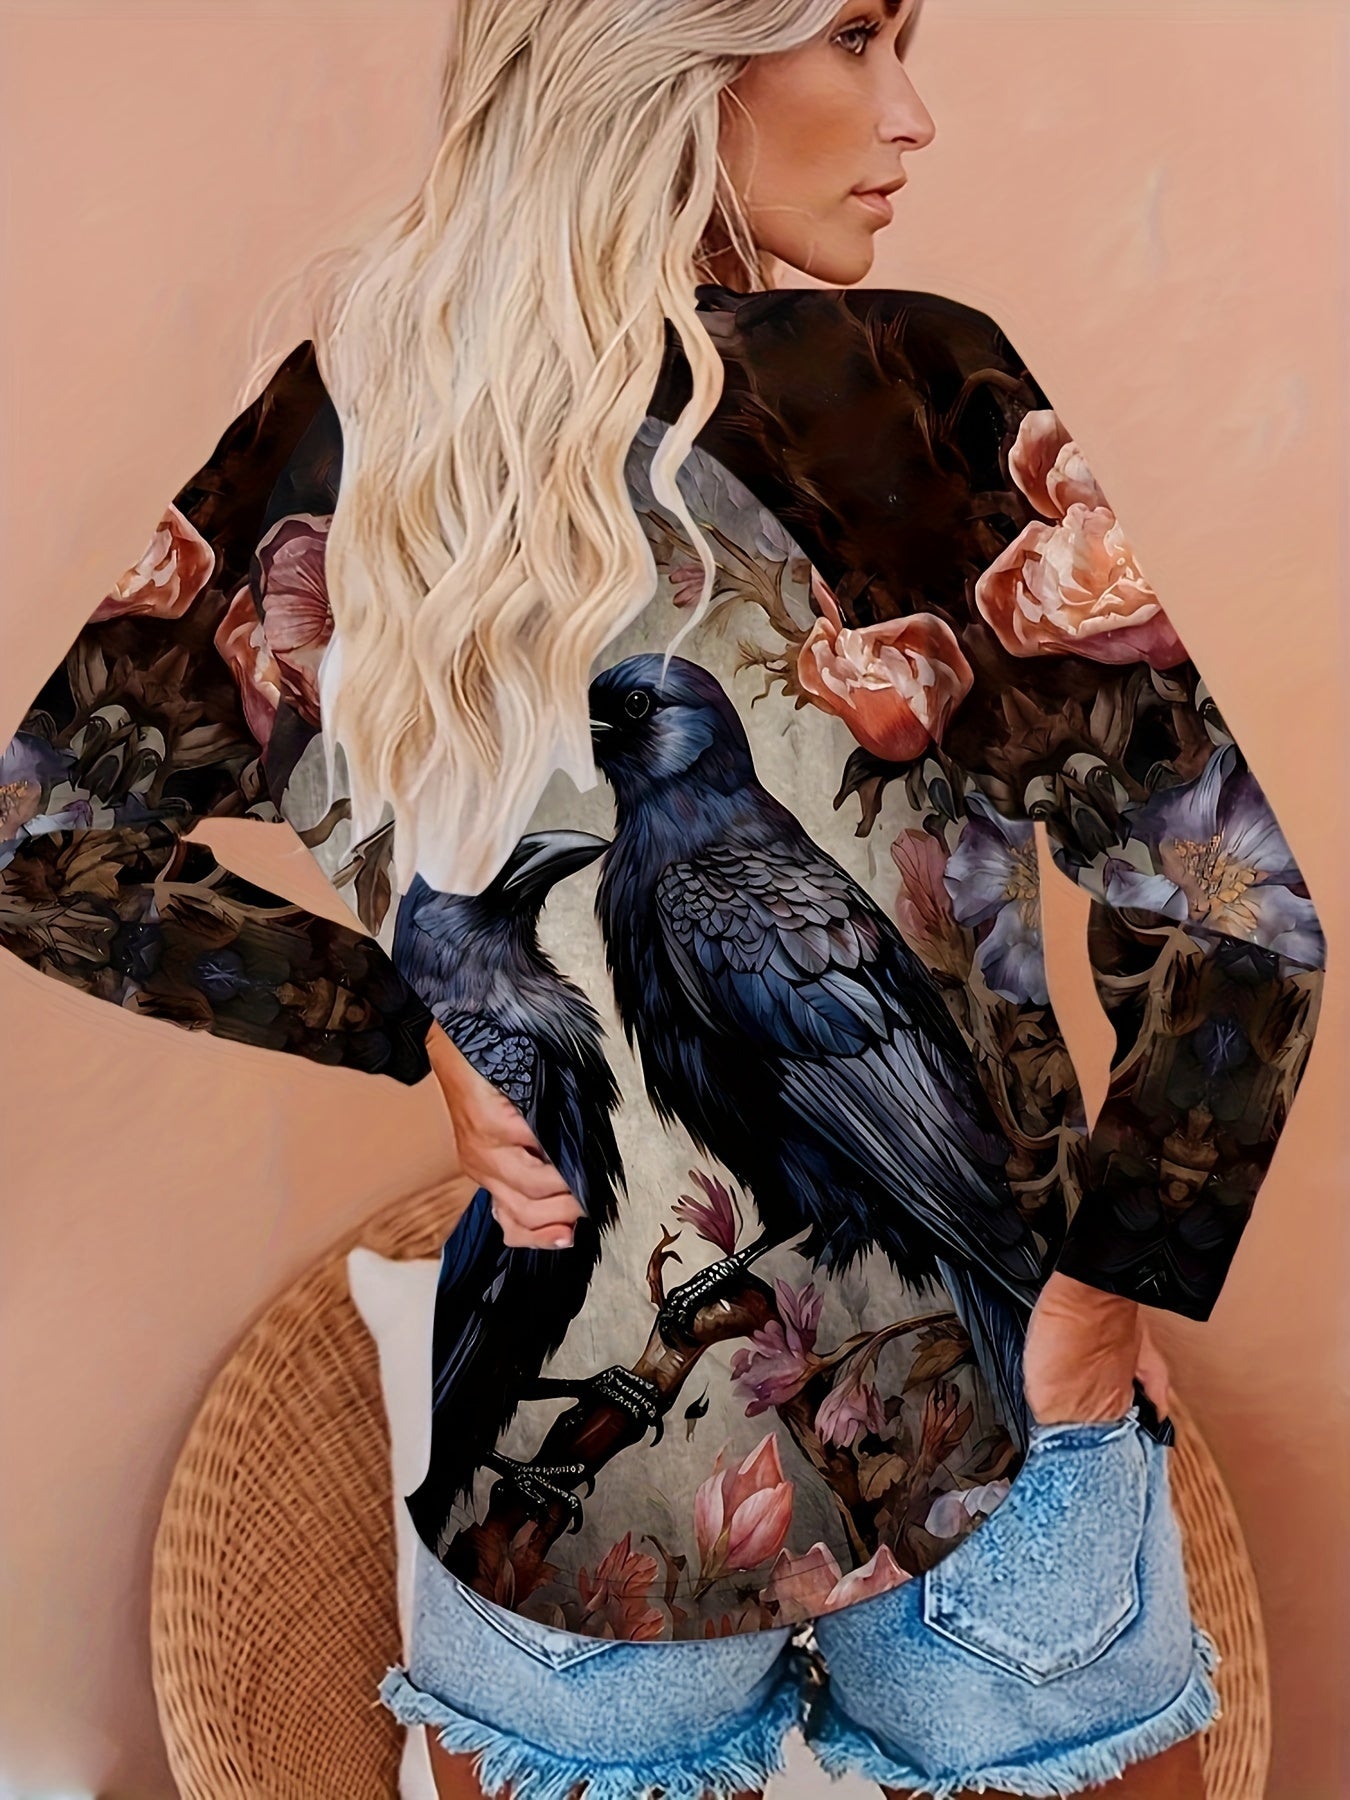 A person with long blonde hair wears a Birds & Floral Print T-shirt, Vintage Crew Neck Long Sleeve T-shirt with a raven design on the back, paired with denim shorts. The outfit showcases micro elasticity for added comfort, perfect for a casual day out. This stylish piece is from Maramalive™ Women's Clothing line.